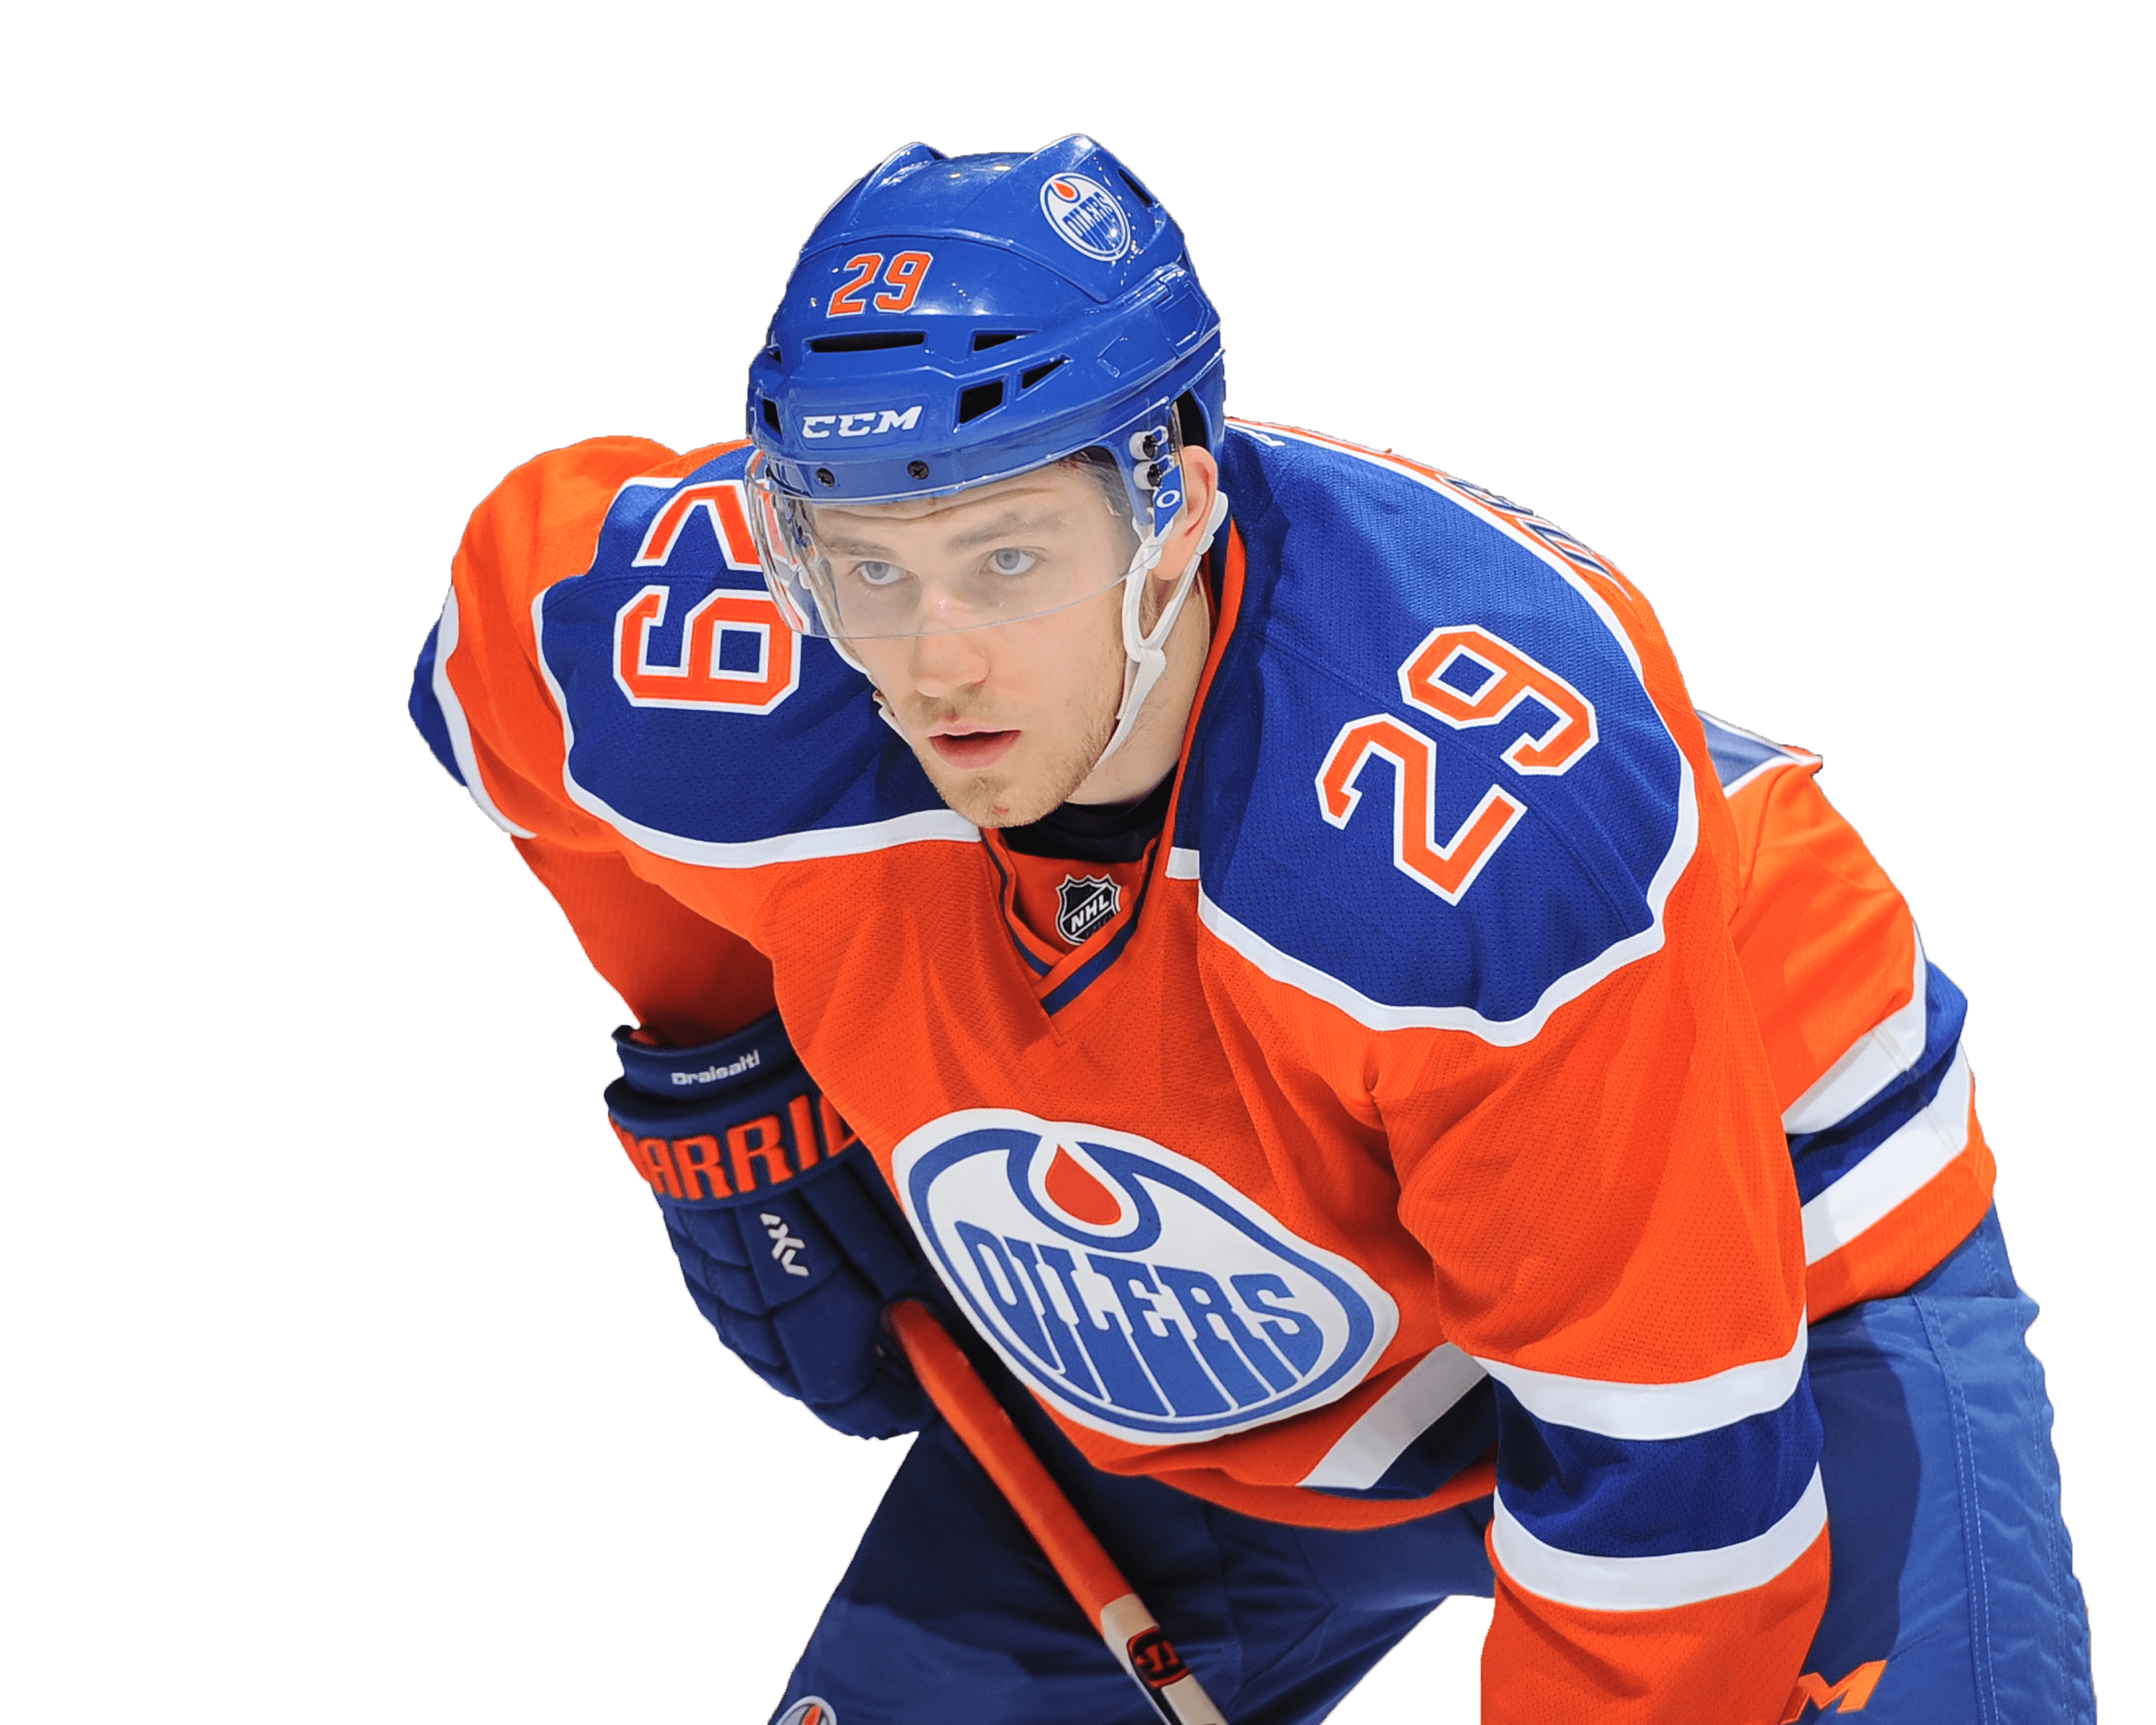 Related Keywords & Suggestions for Leon Draisaitl